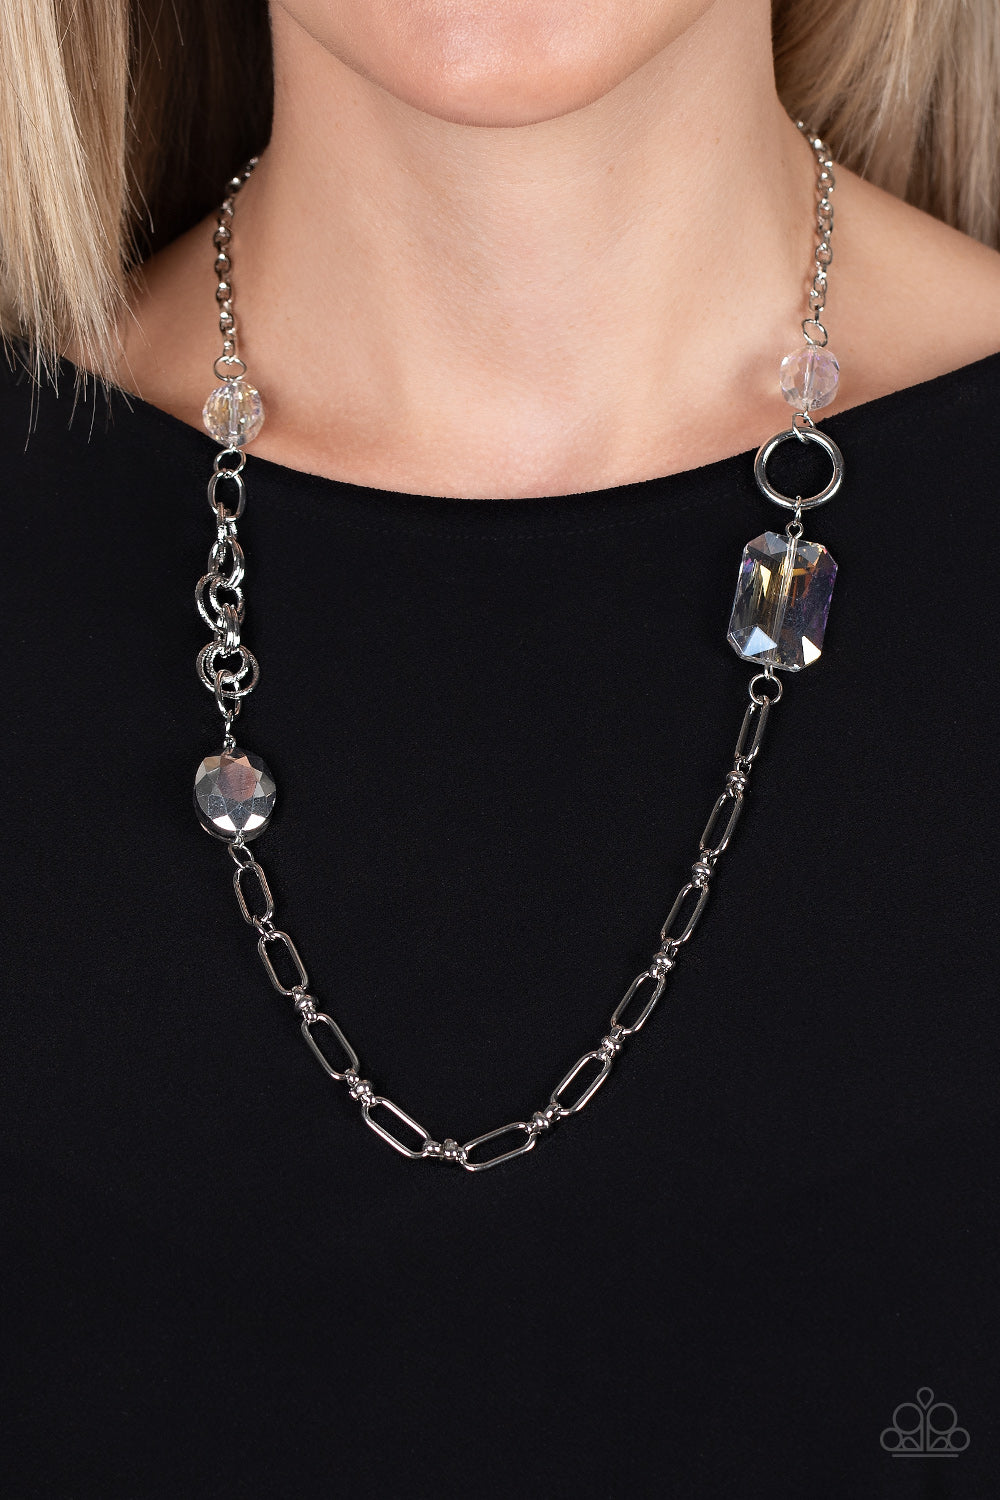 Famous and Fabulous - Iridescent/Multicolor necklace